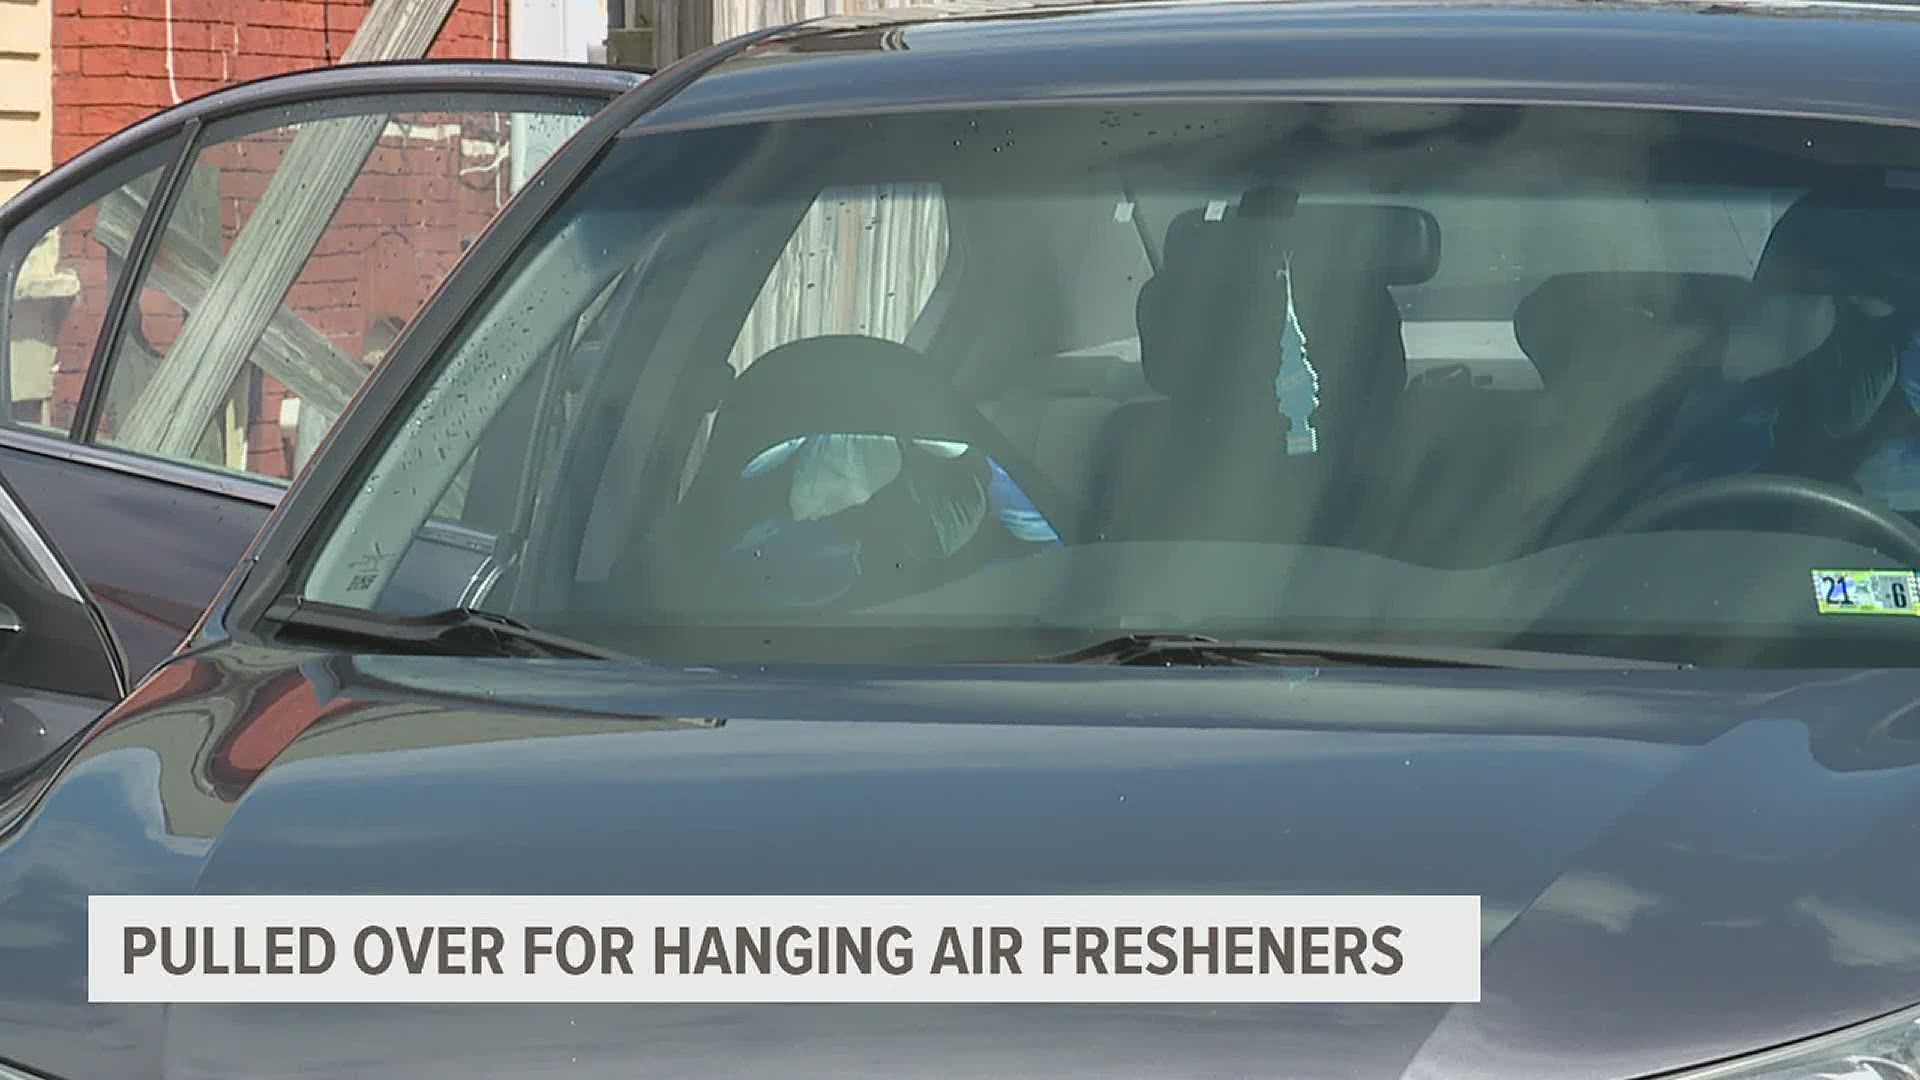 In Pennsylvania, you can get pulled over for hanging an air freshener